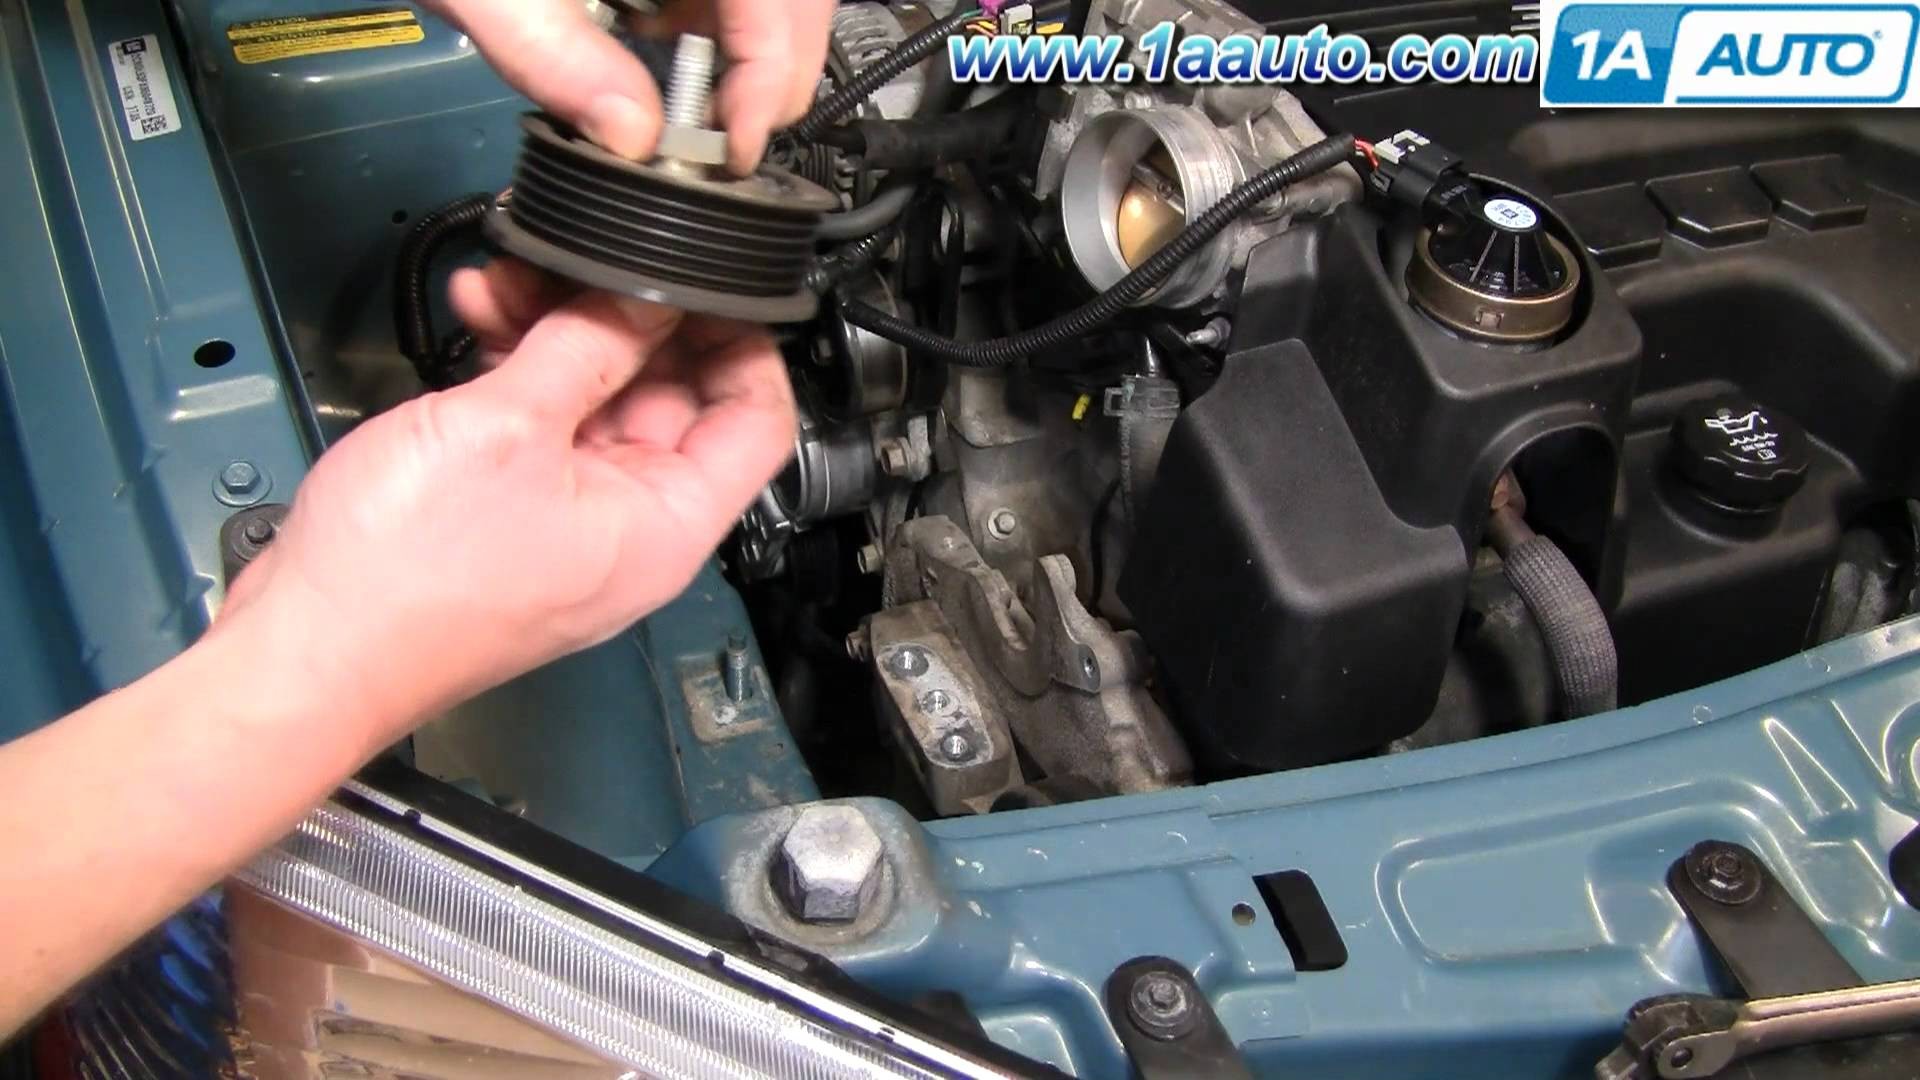 2006 Pontiac torrent Engine Diagram How to Install Replace Upper Idler Pulley Chevy Equinox 3 4l 05 09 Of 2006 Pontiac torrent Engine Diagram